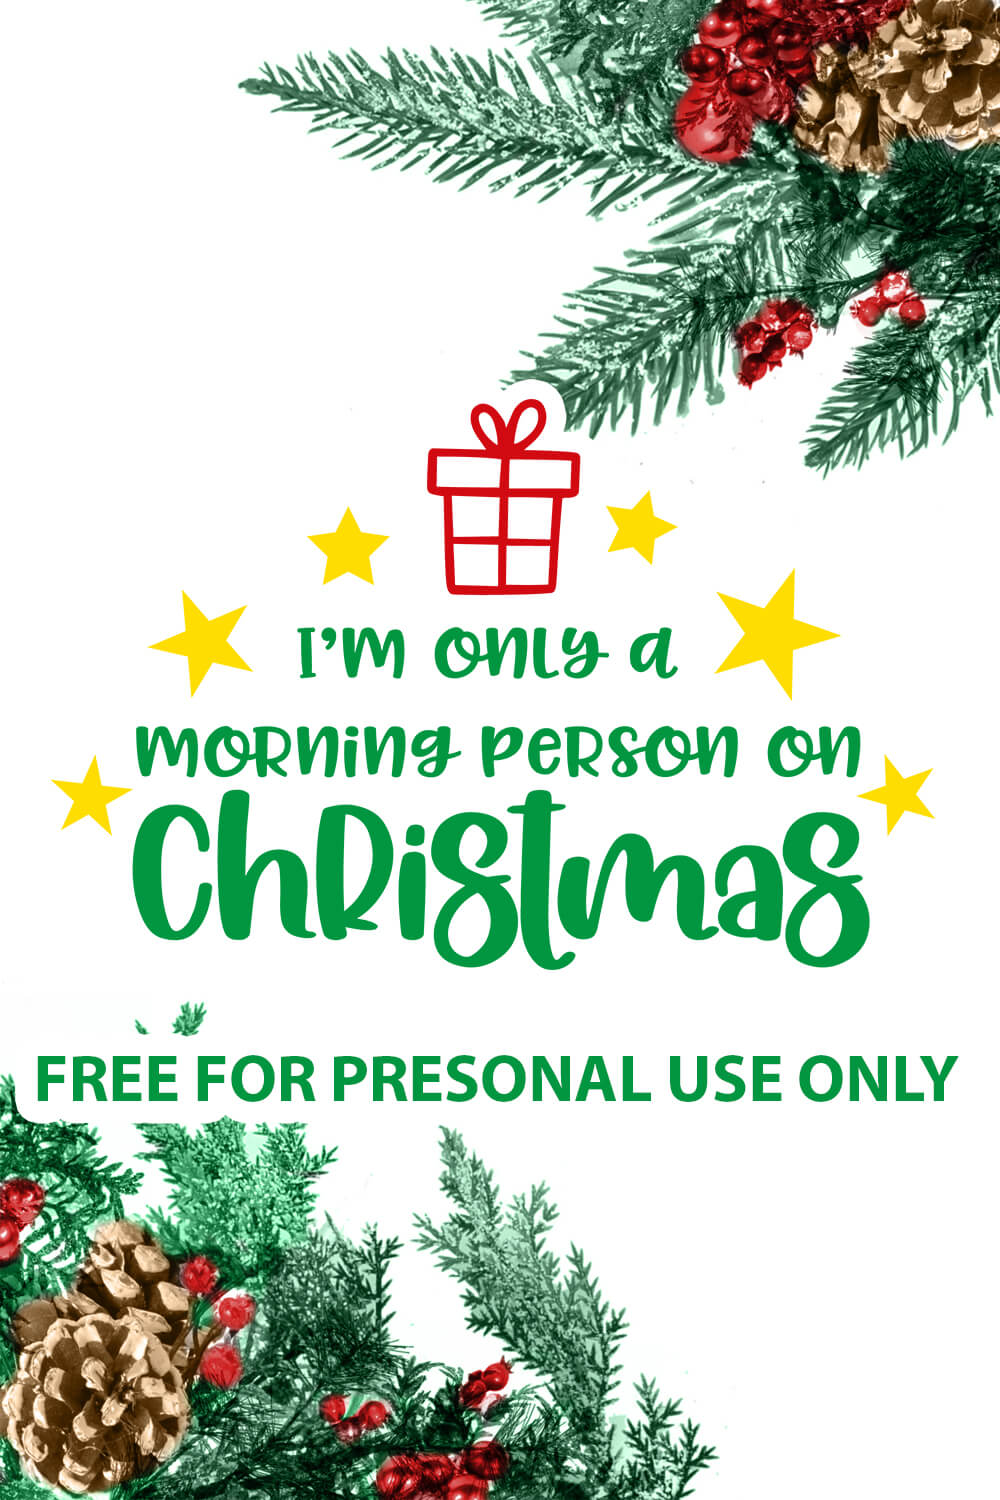 Im only a morning person on Christmas free SVG files pinterest image.